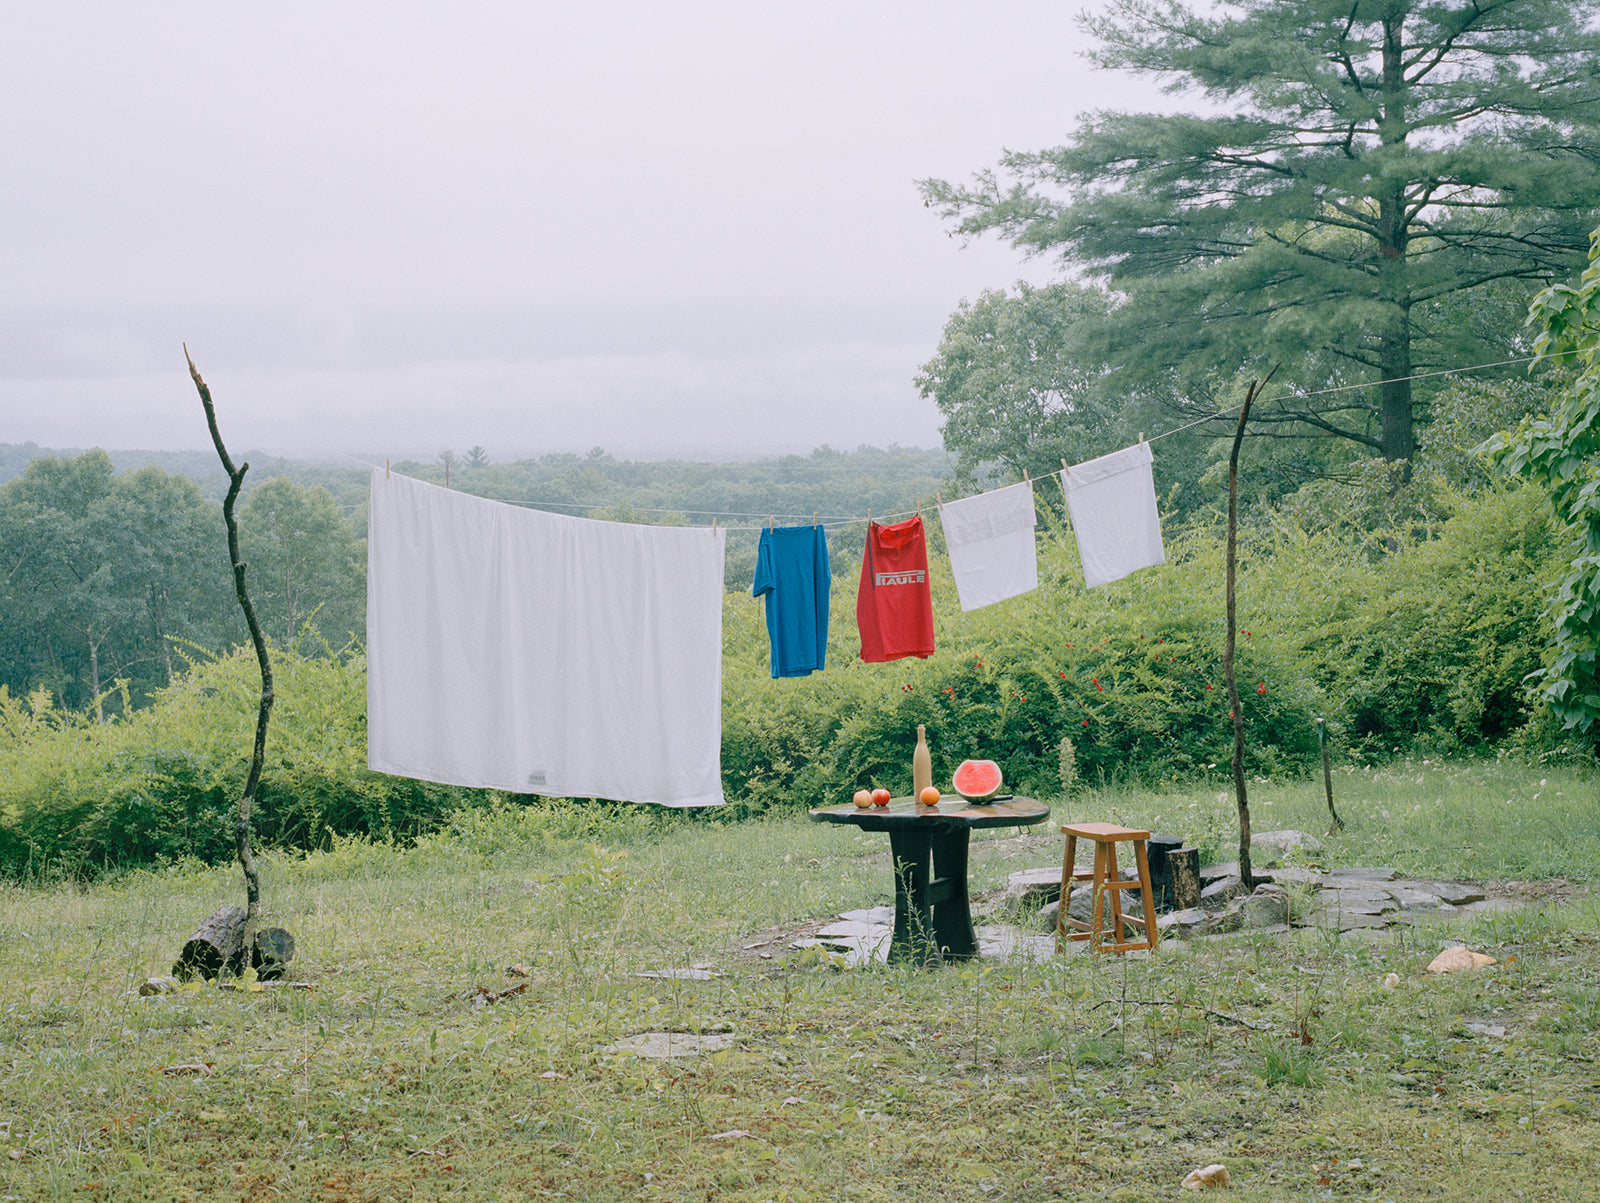  laundry line in nature in upstate new york drying the best white sheets and clothing